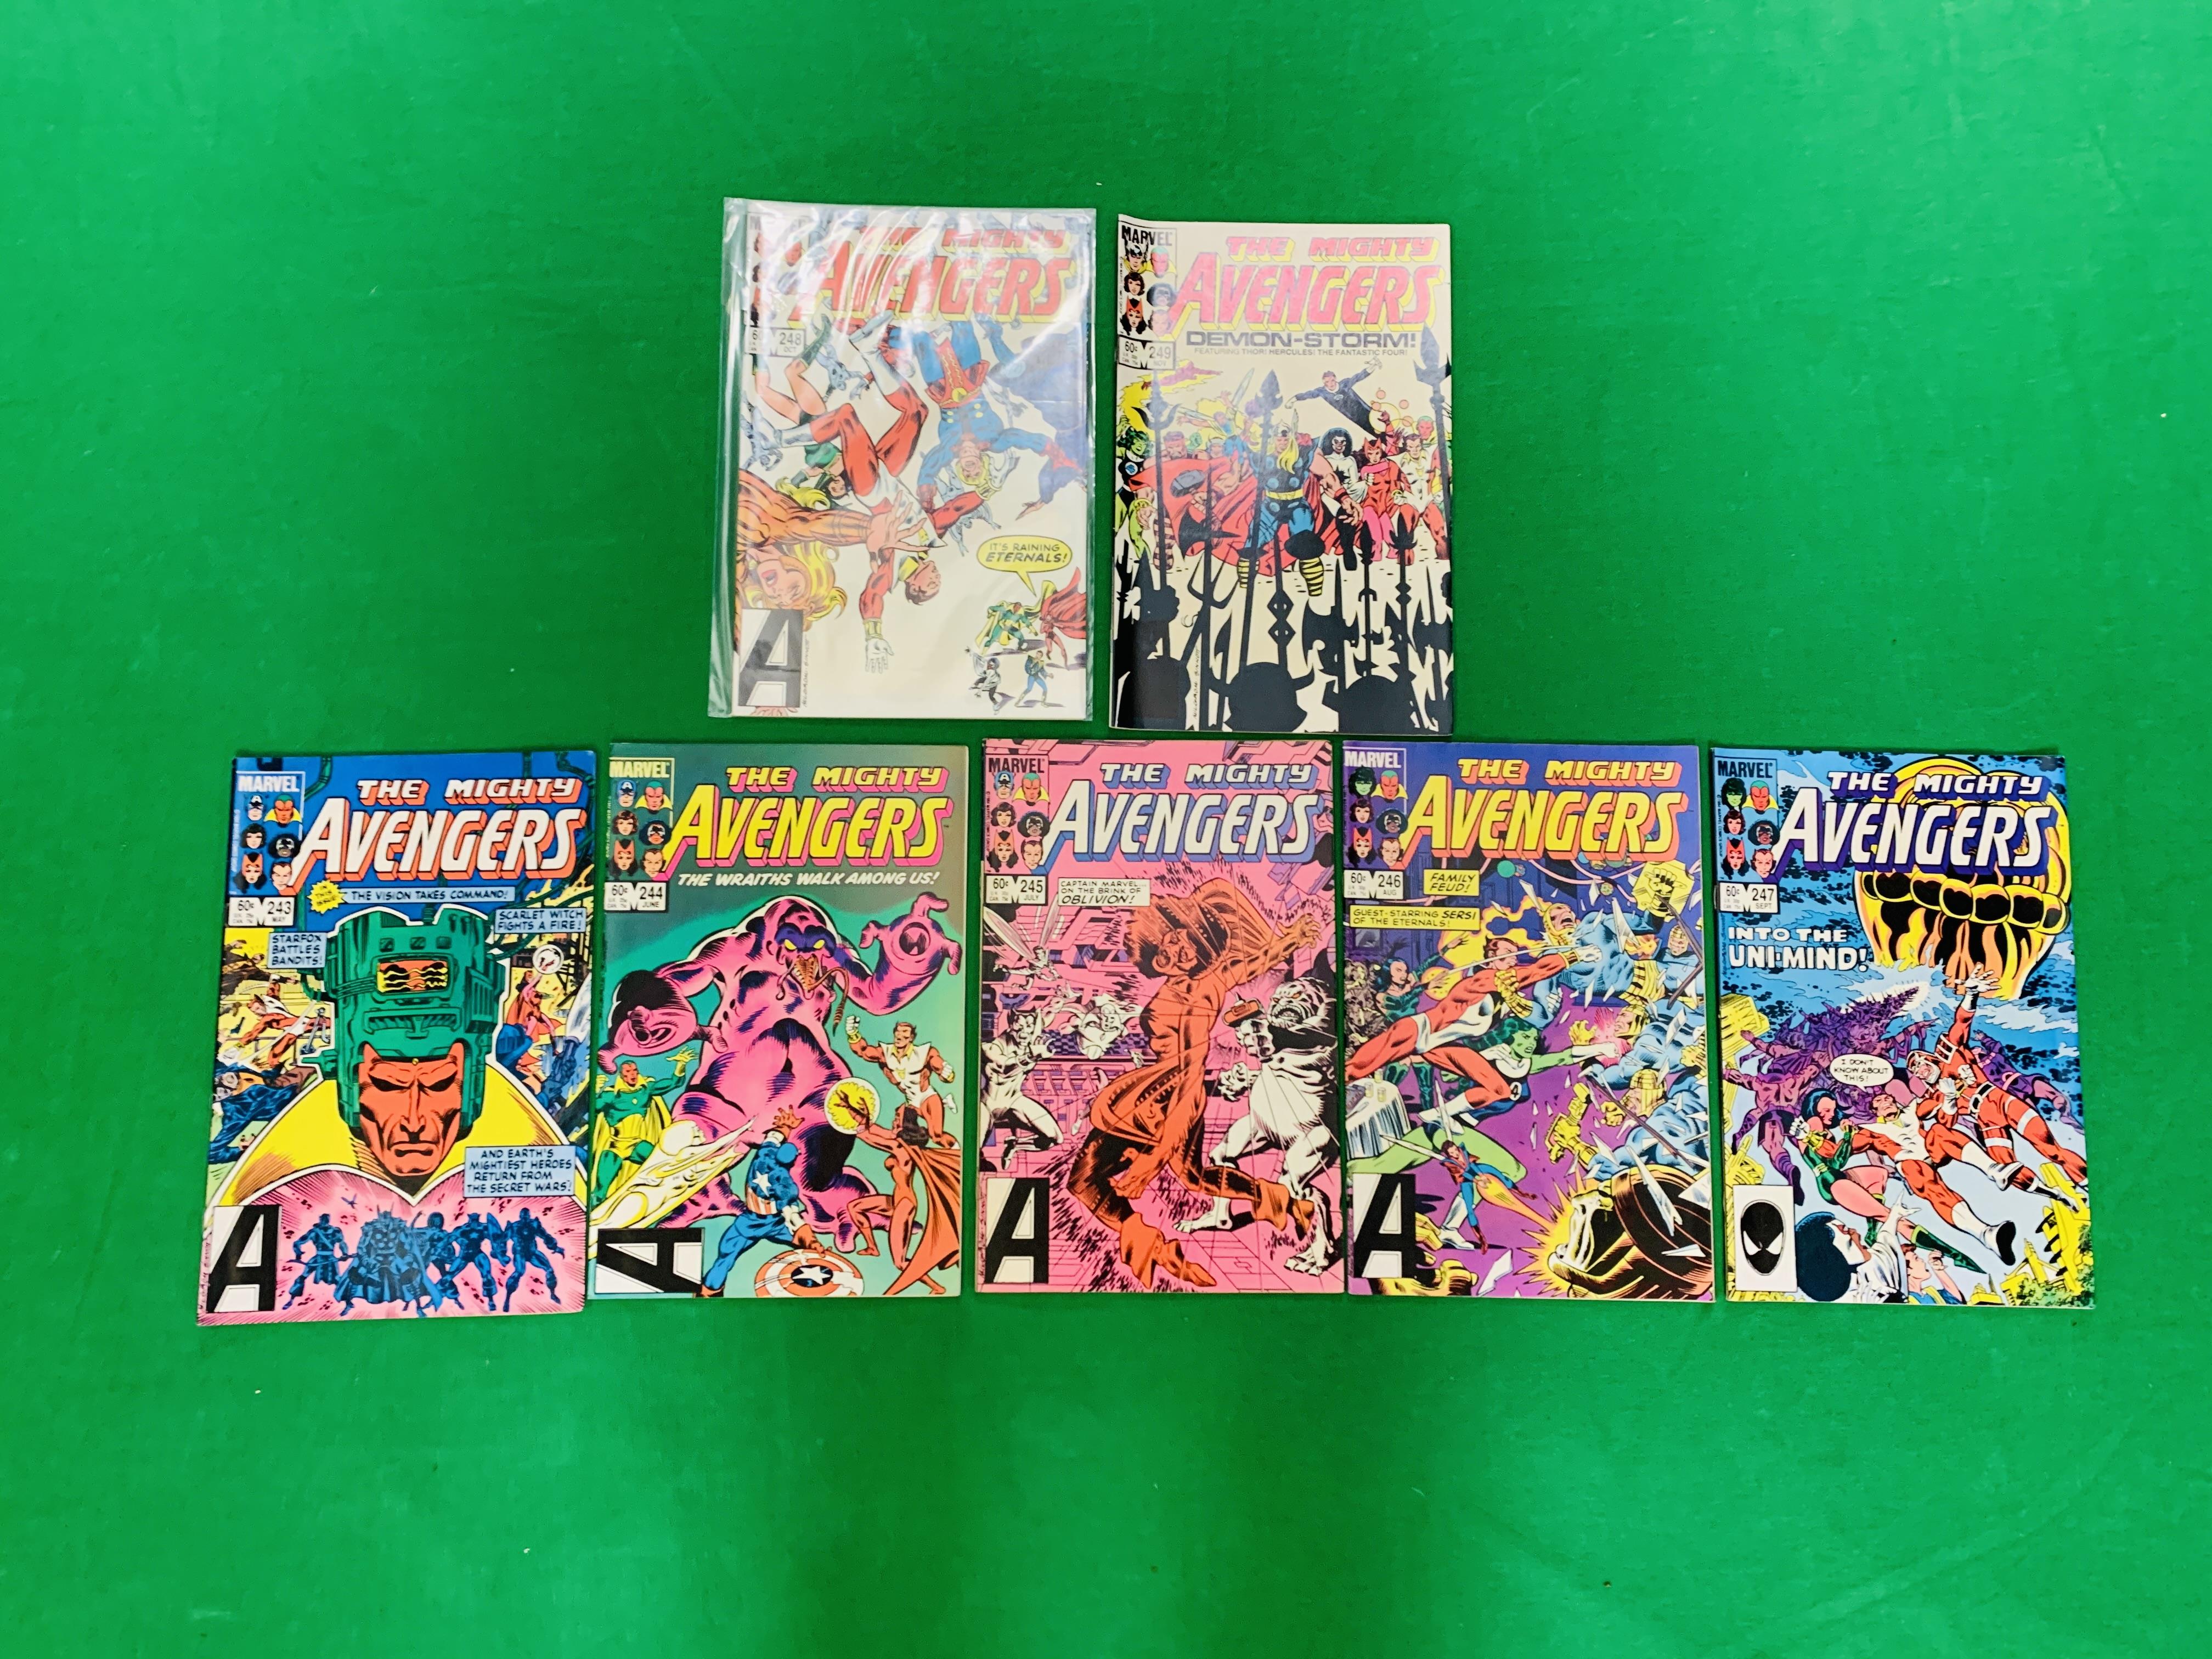 MARVEL COMICS THE AVENGERS NO. 101 - 299, MISSING ISSUES 103 AND 110. - Image 99 of 130